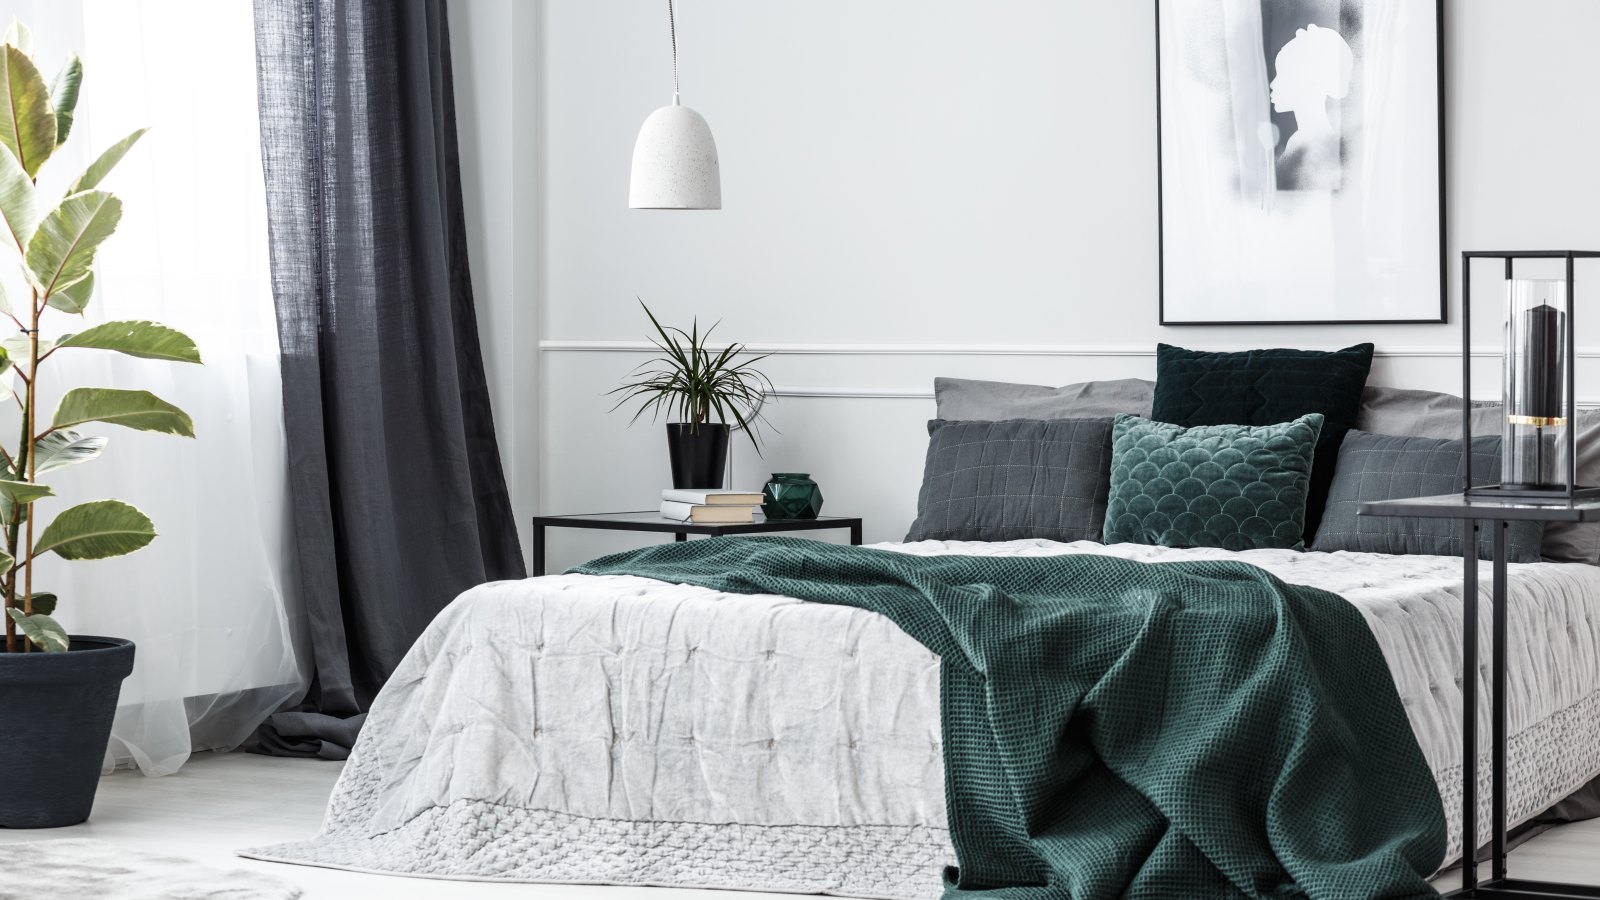 Green blanket on bed in elegant bedroom interior with poster on white wall and plant on table